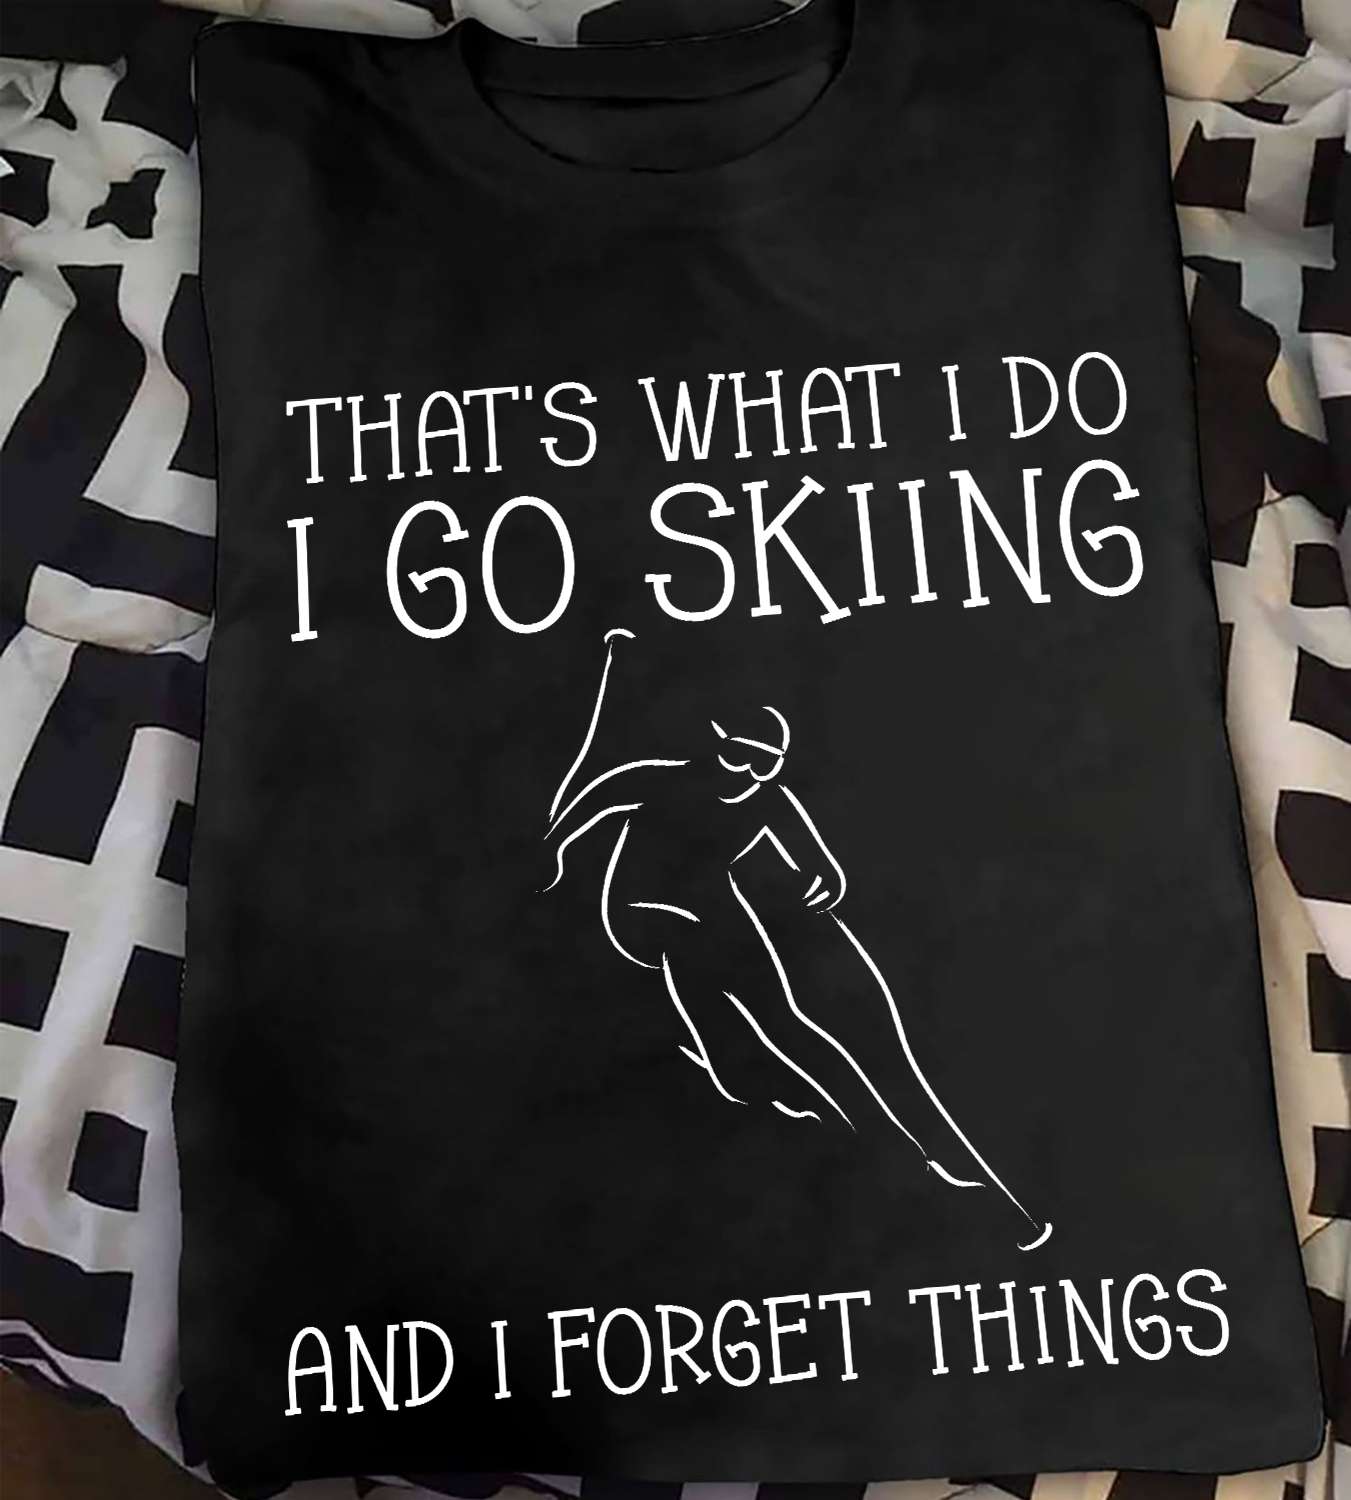 That's what I do I go skiing and I forget things - Gift for skier, love to go skiing